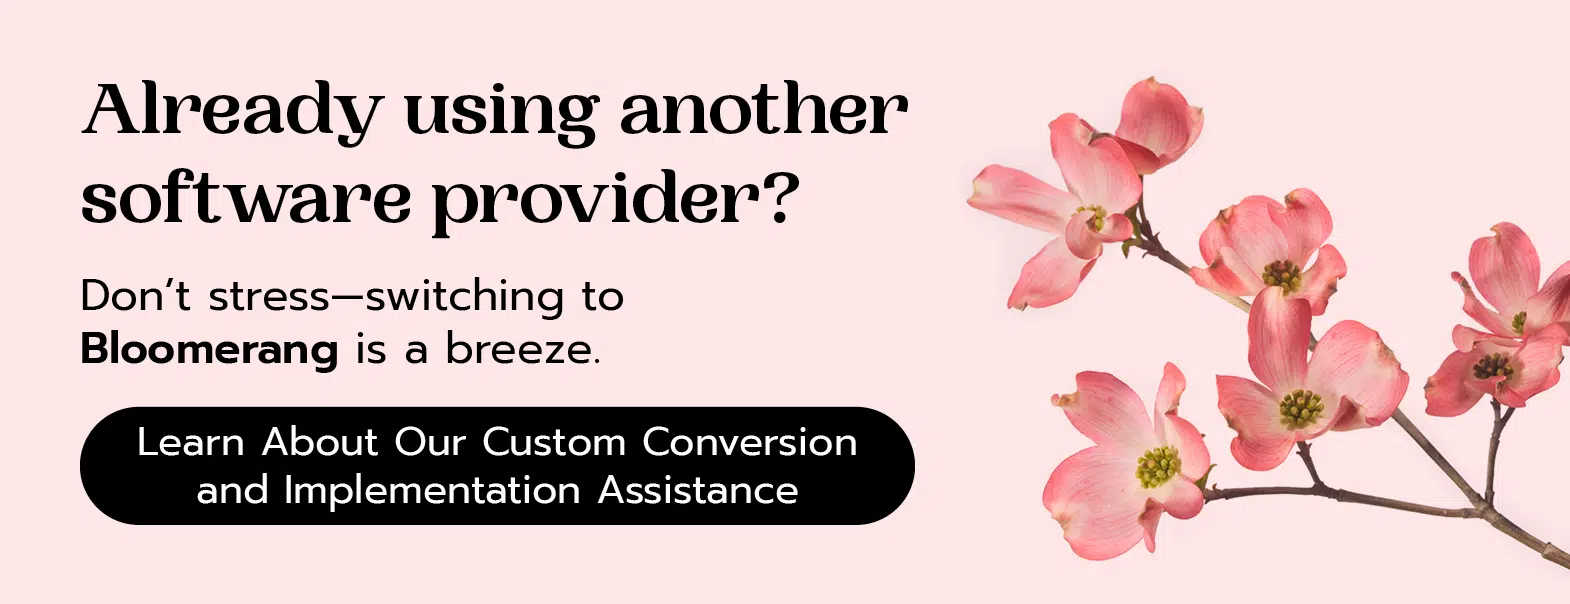 Switching to Bloomerang is a breeze. Learn About Our Custom Conversion and Implementation Assistance.